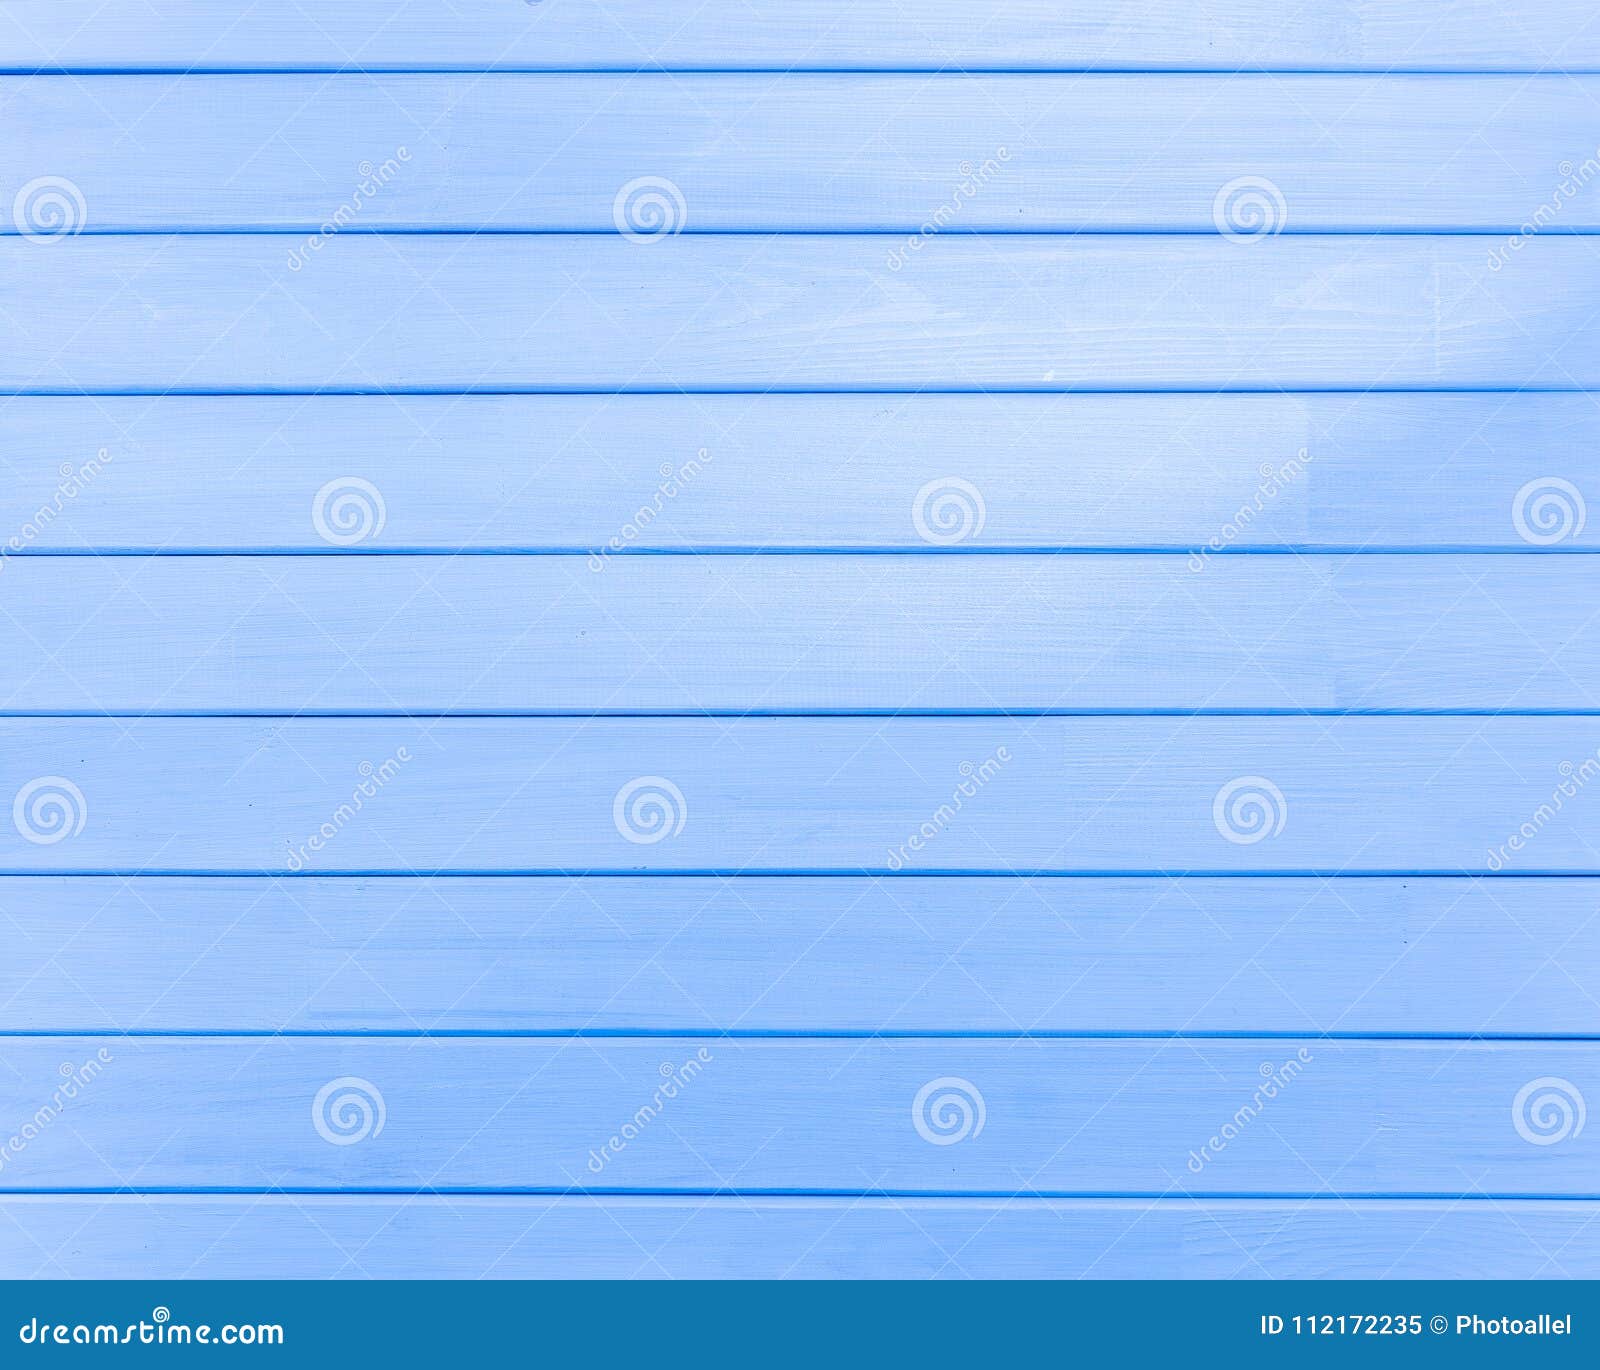 Background of New Natural Wooden Table Blue Color Stock Image - Image